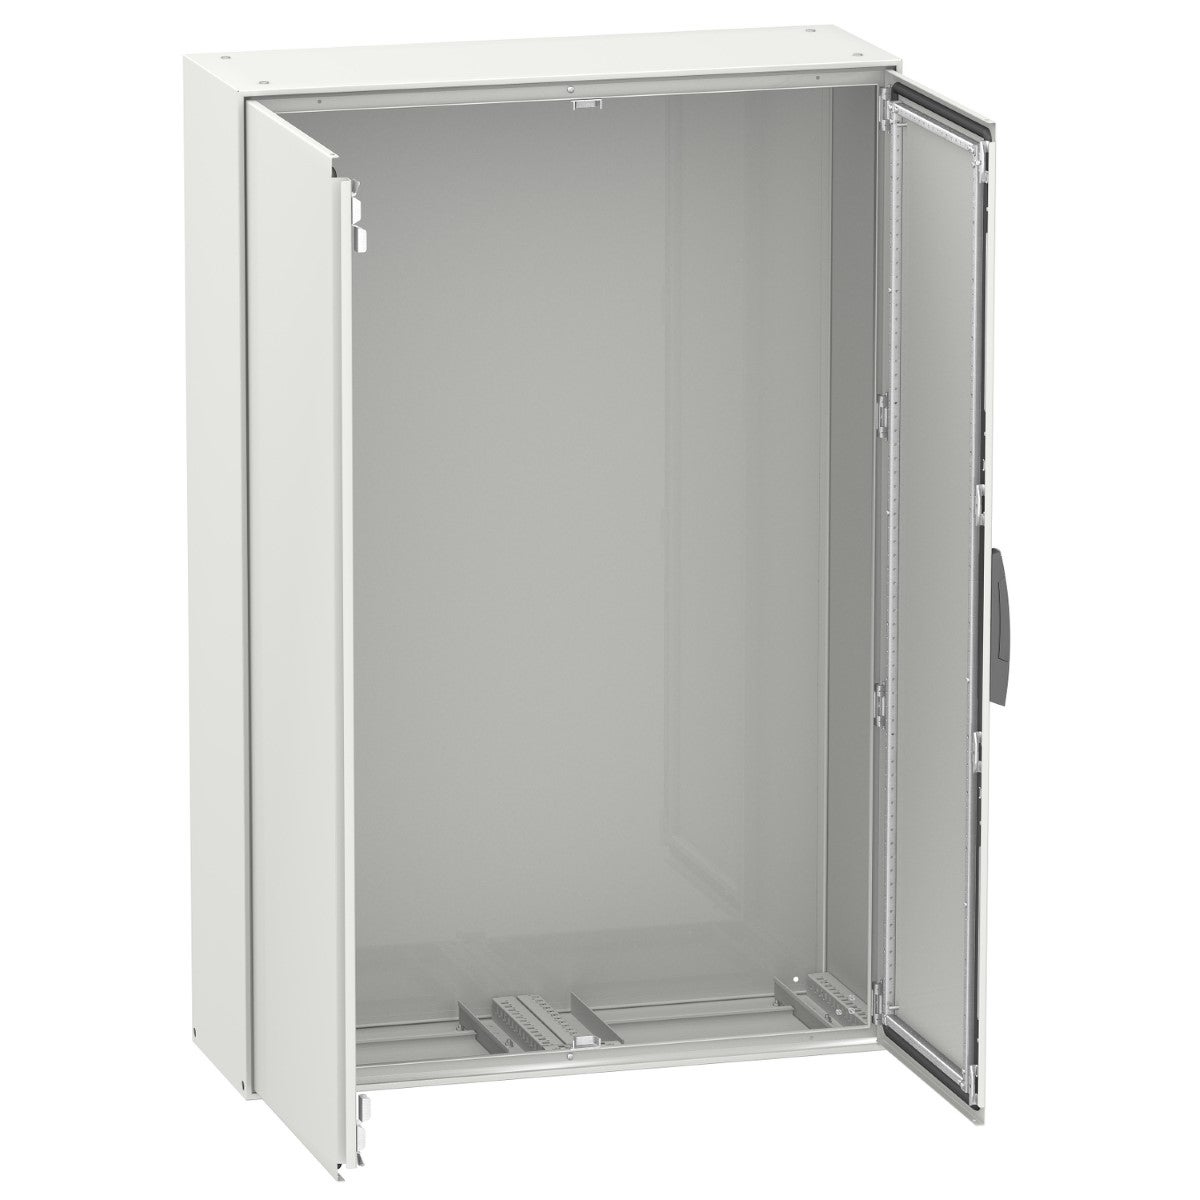 Spacial SM compact enclosure with mounting plate - 1800x1200x400 mm